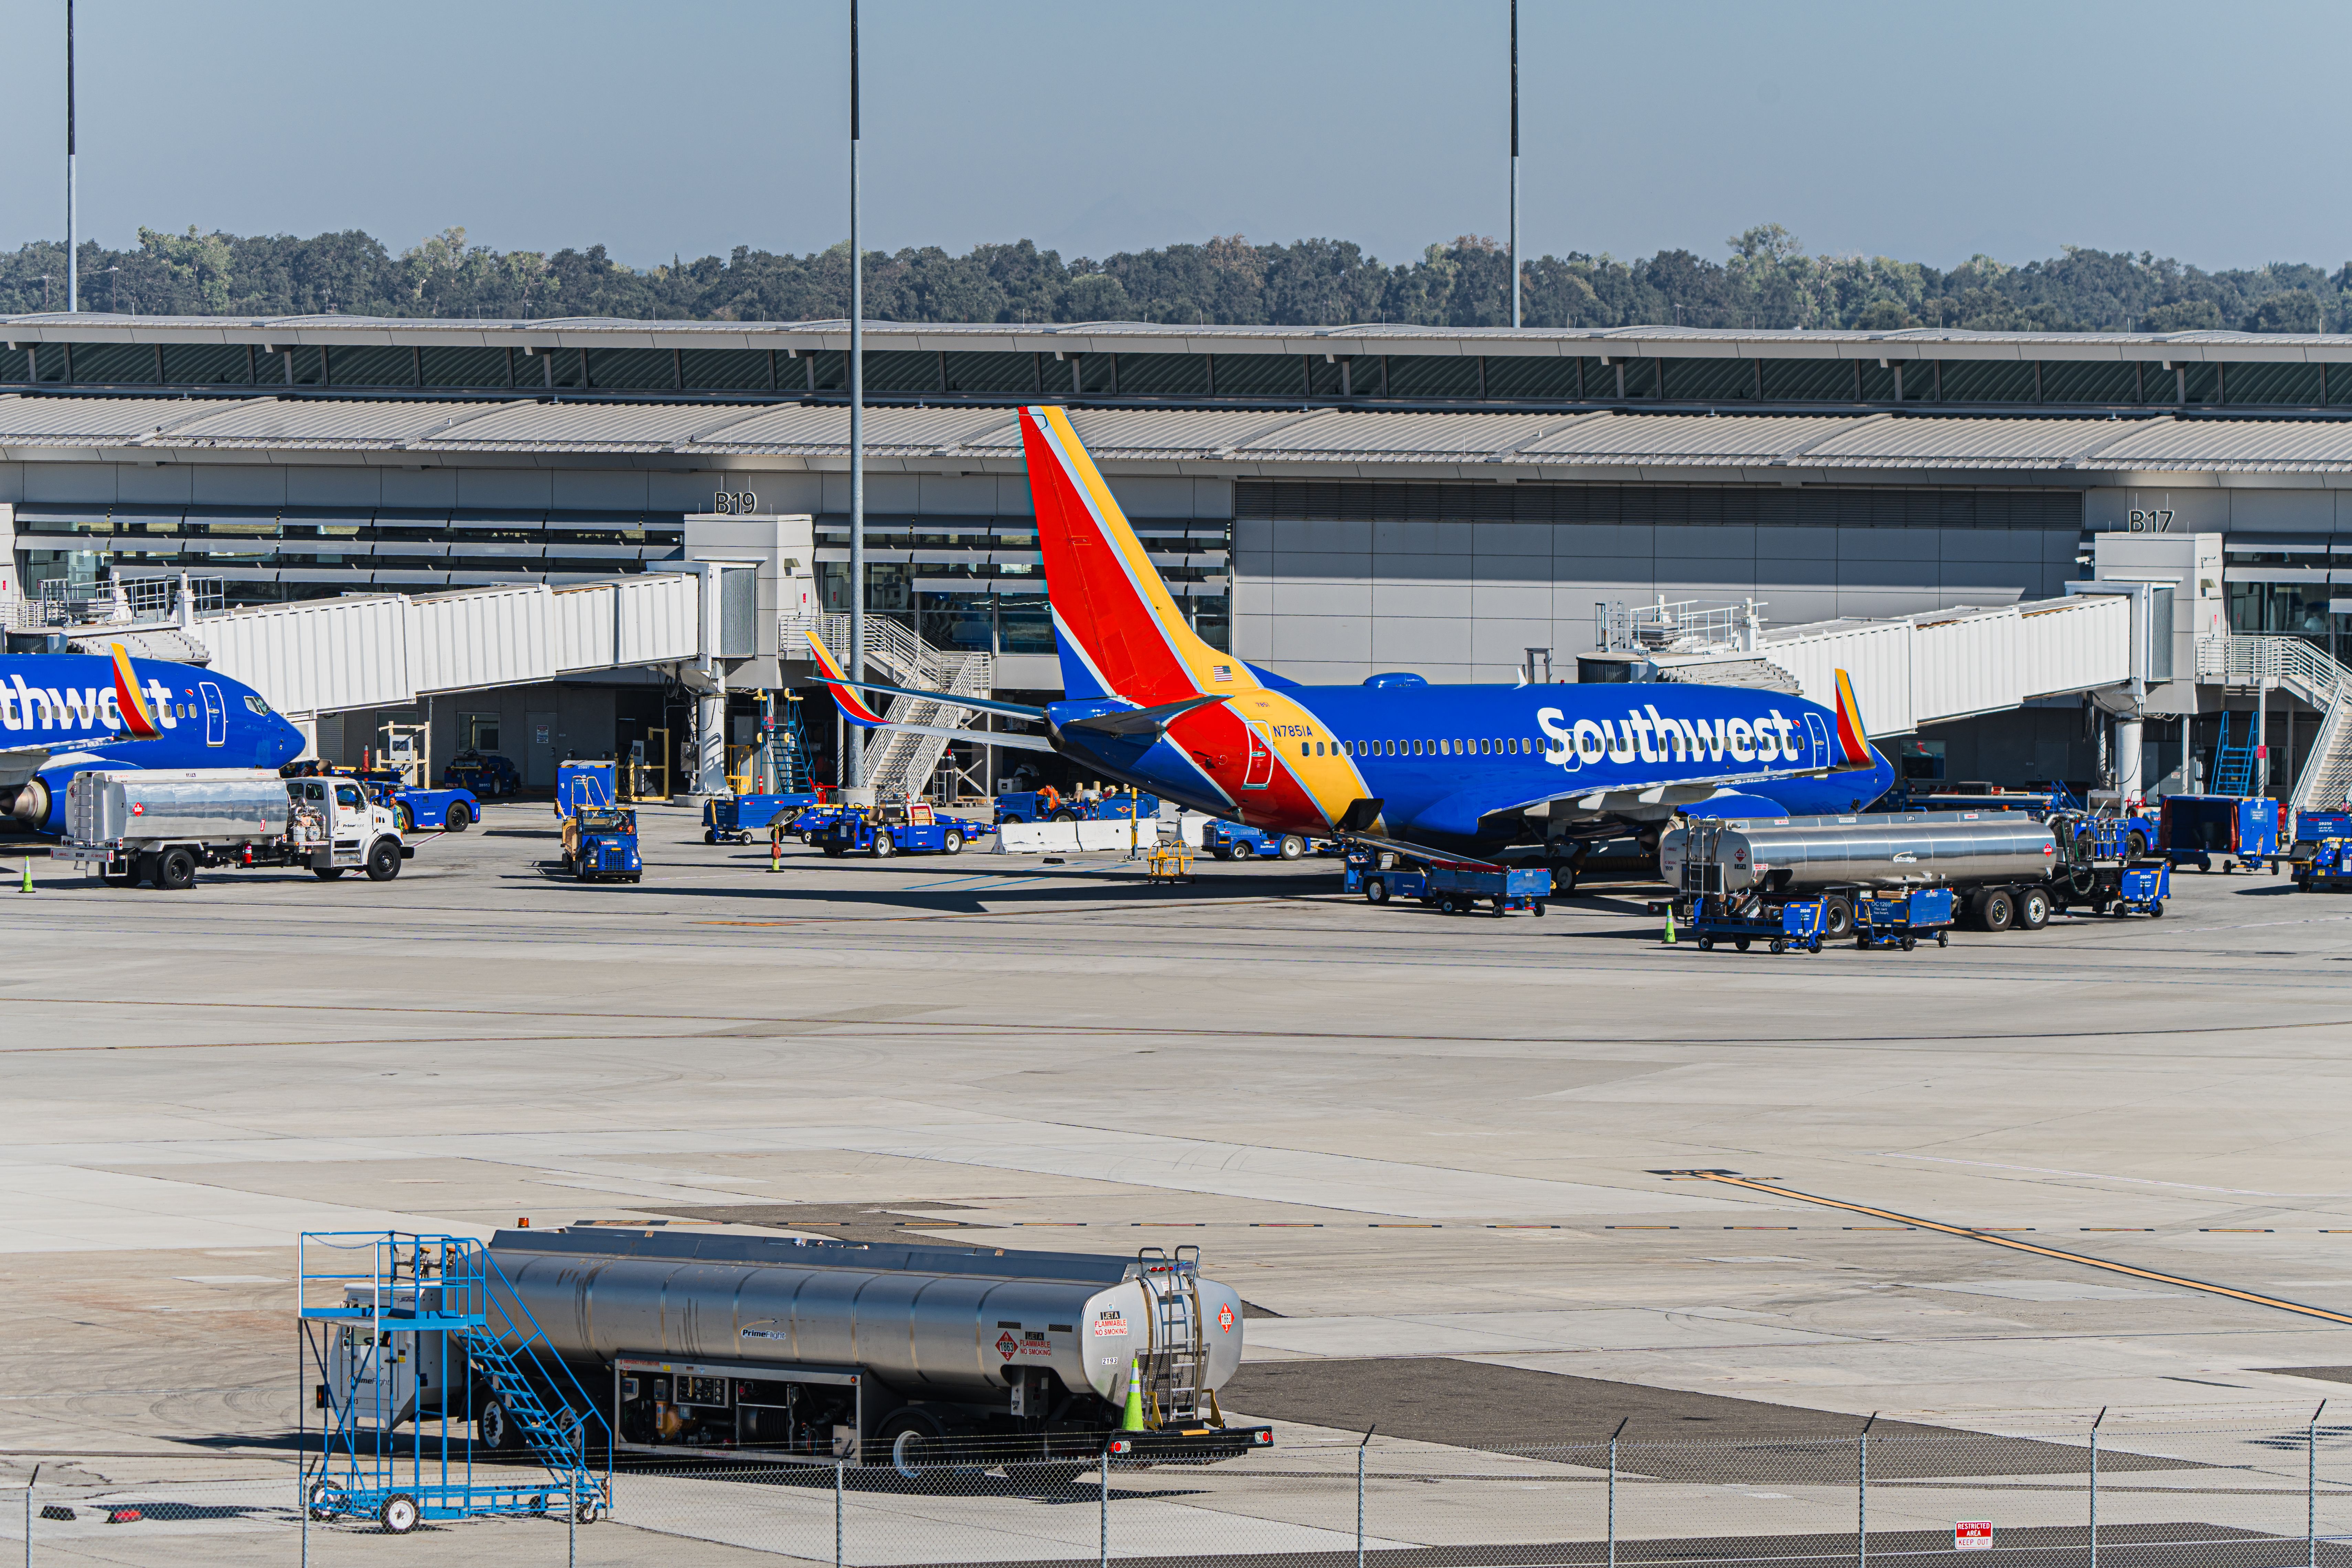 Southwest Airlines aircraft parked at Terminal B SMF